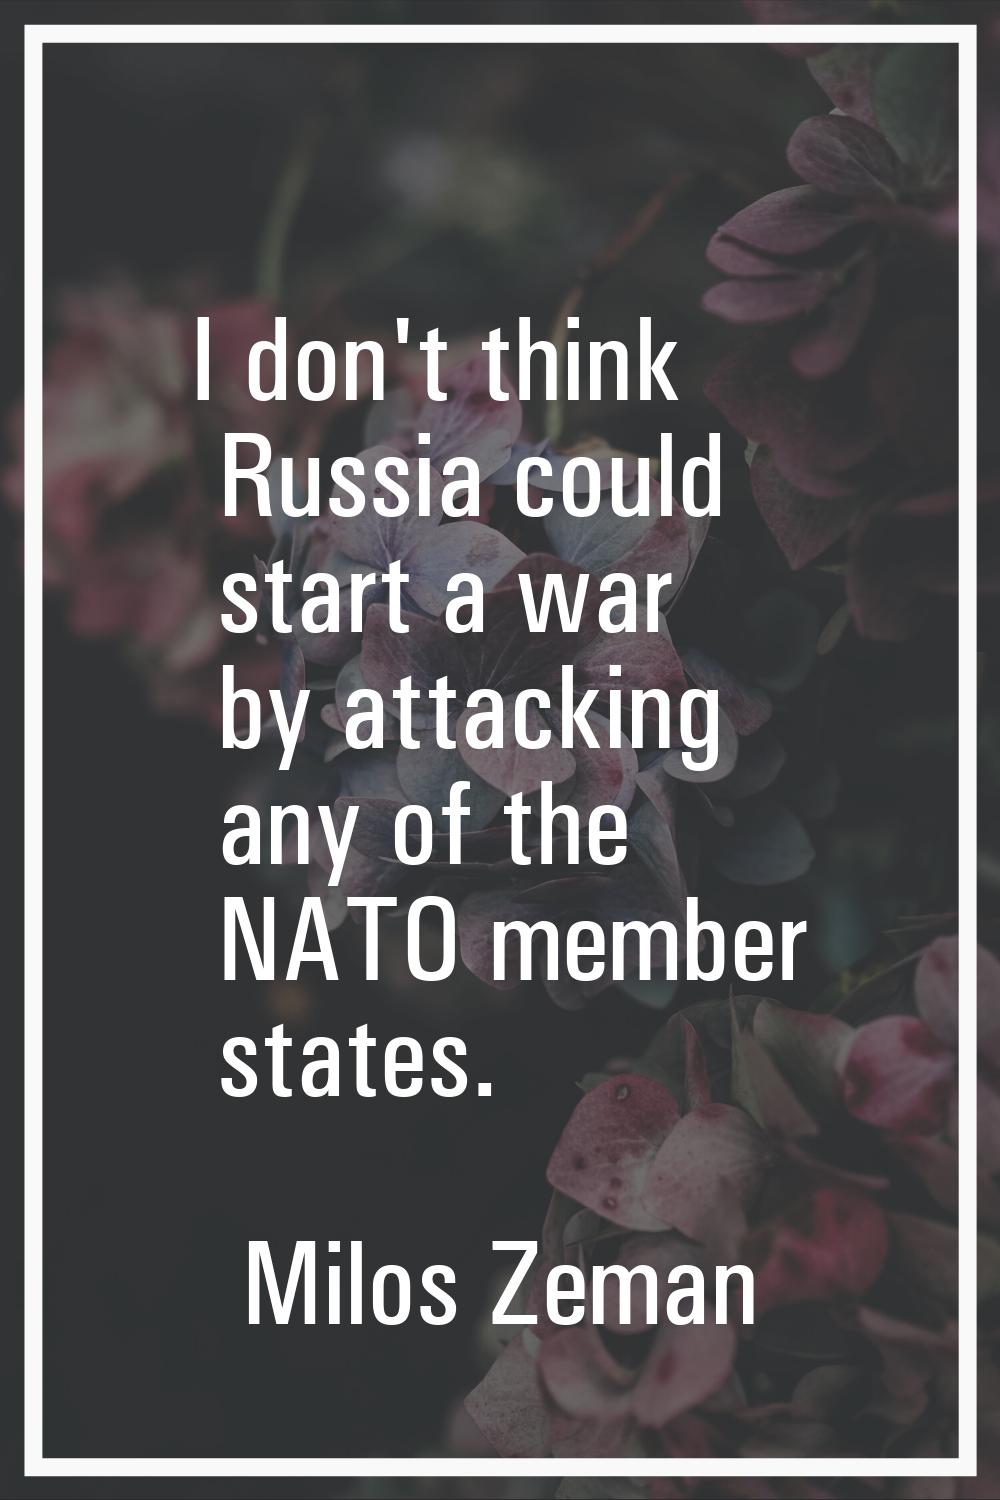 I don't think Russia could start a war by attacking any of the NATO member states.